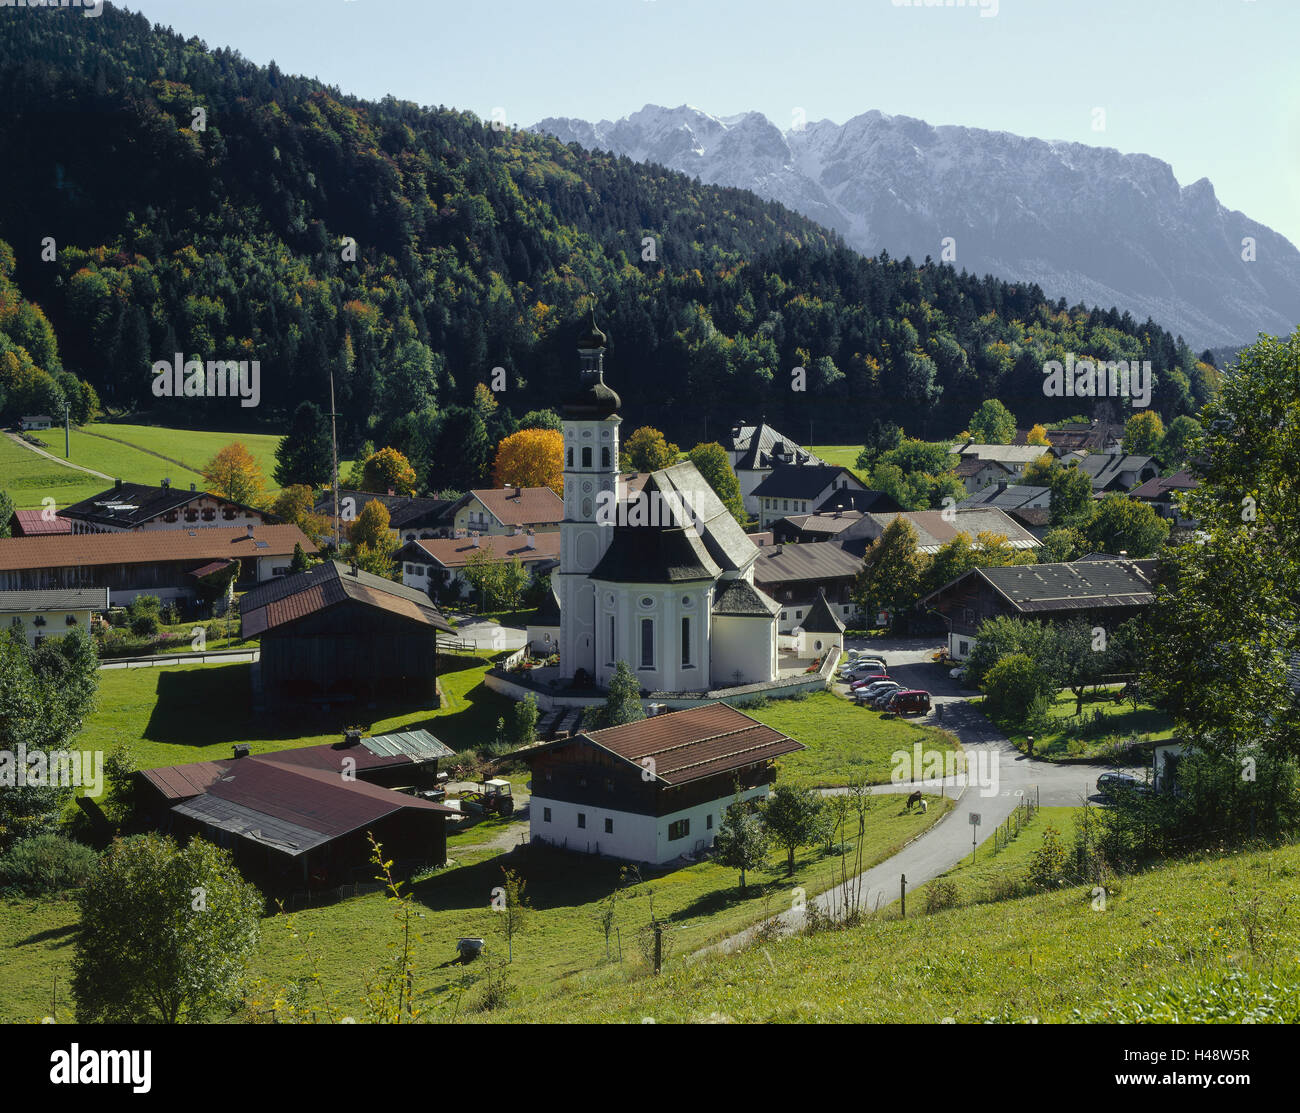 Germany, Bavaria, Chiemgau, material rank, local view, parish church, St. Michael, Upper Bavaria, resort, place, town view, church, towers, steeples, houses, farmhouses, mountains, Kaisergebirge, place of interest, tourism, summer, Stock Photo